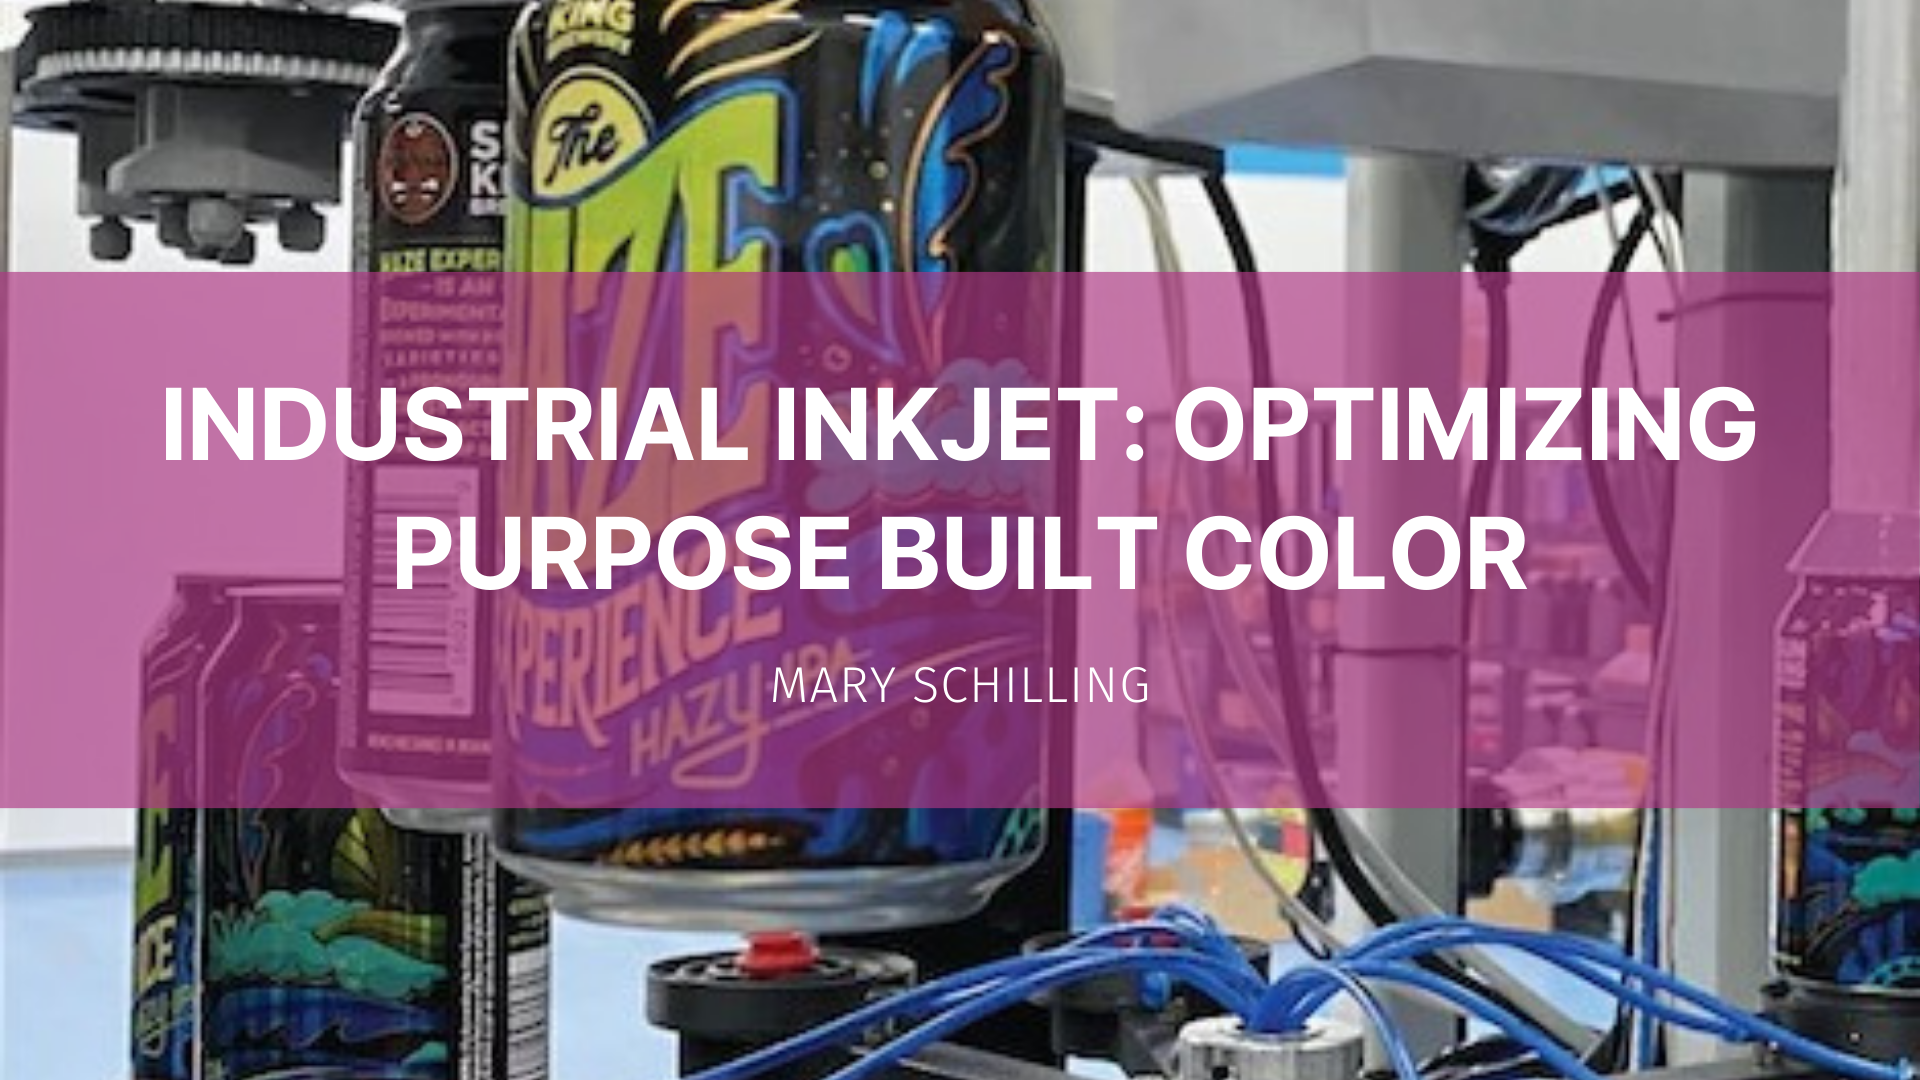 Featured image for “Industrial Inkjet: Optimizing Purpose Built Color”